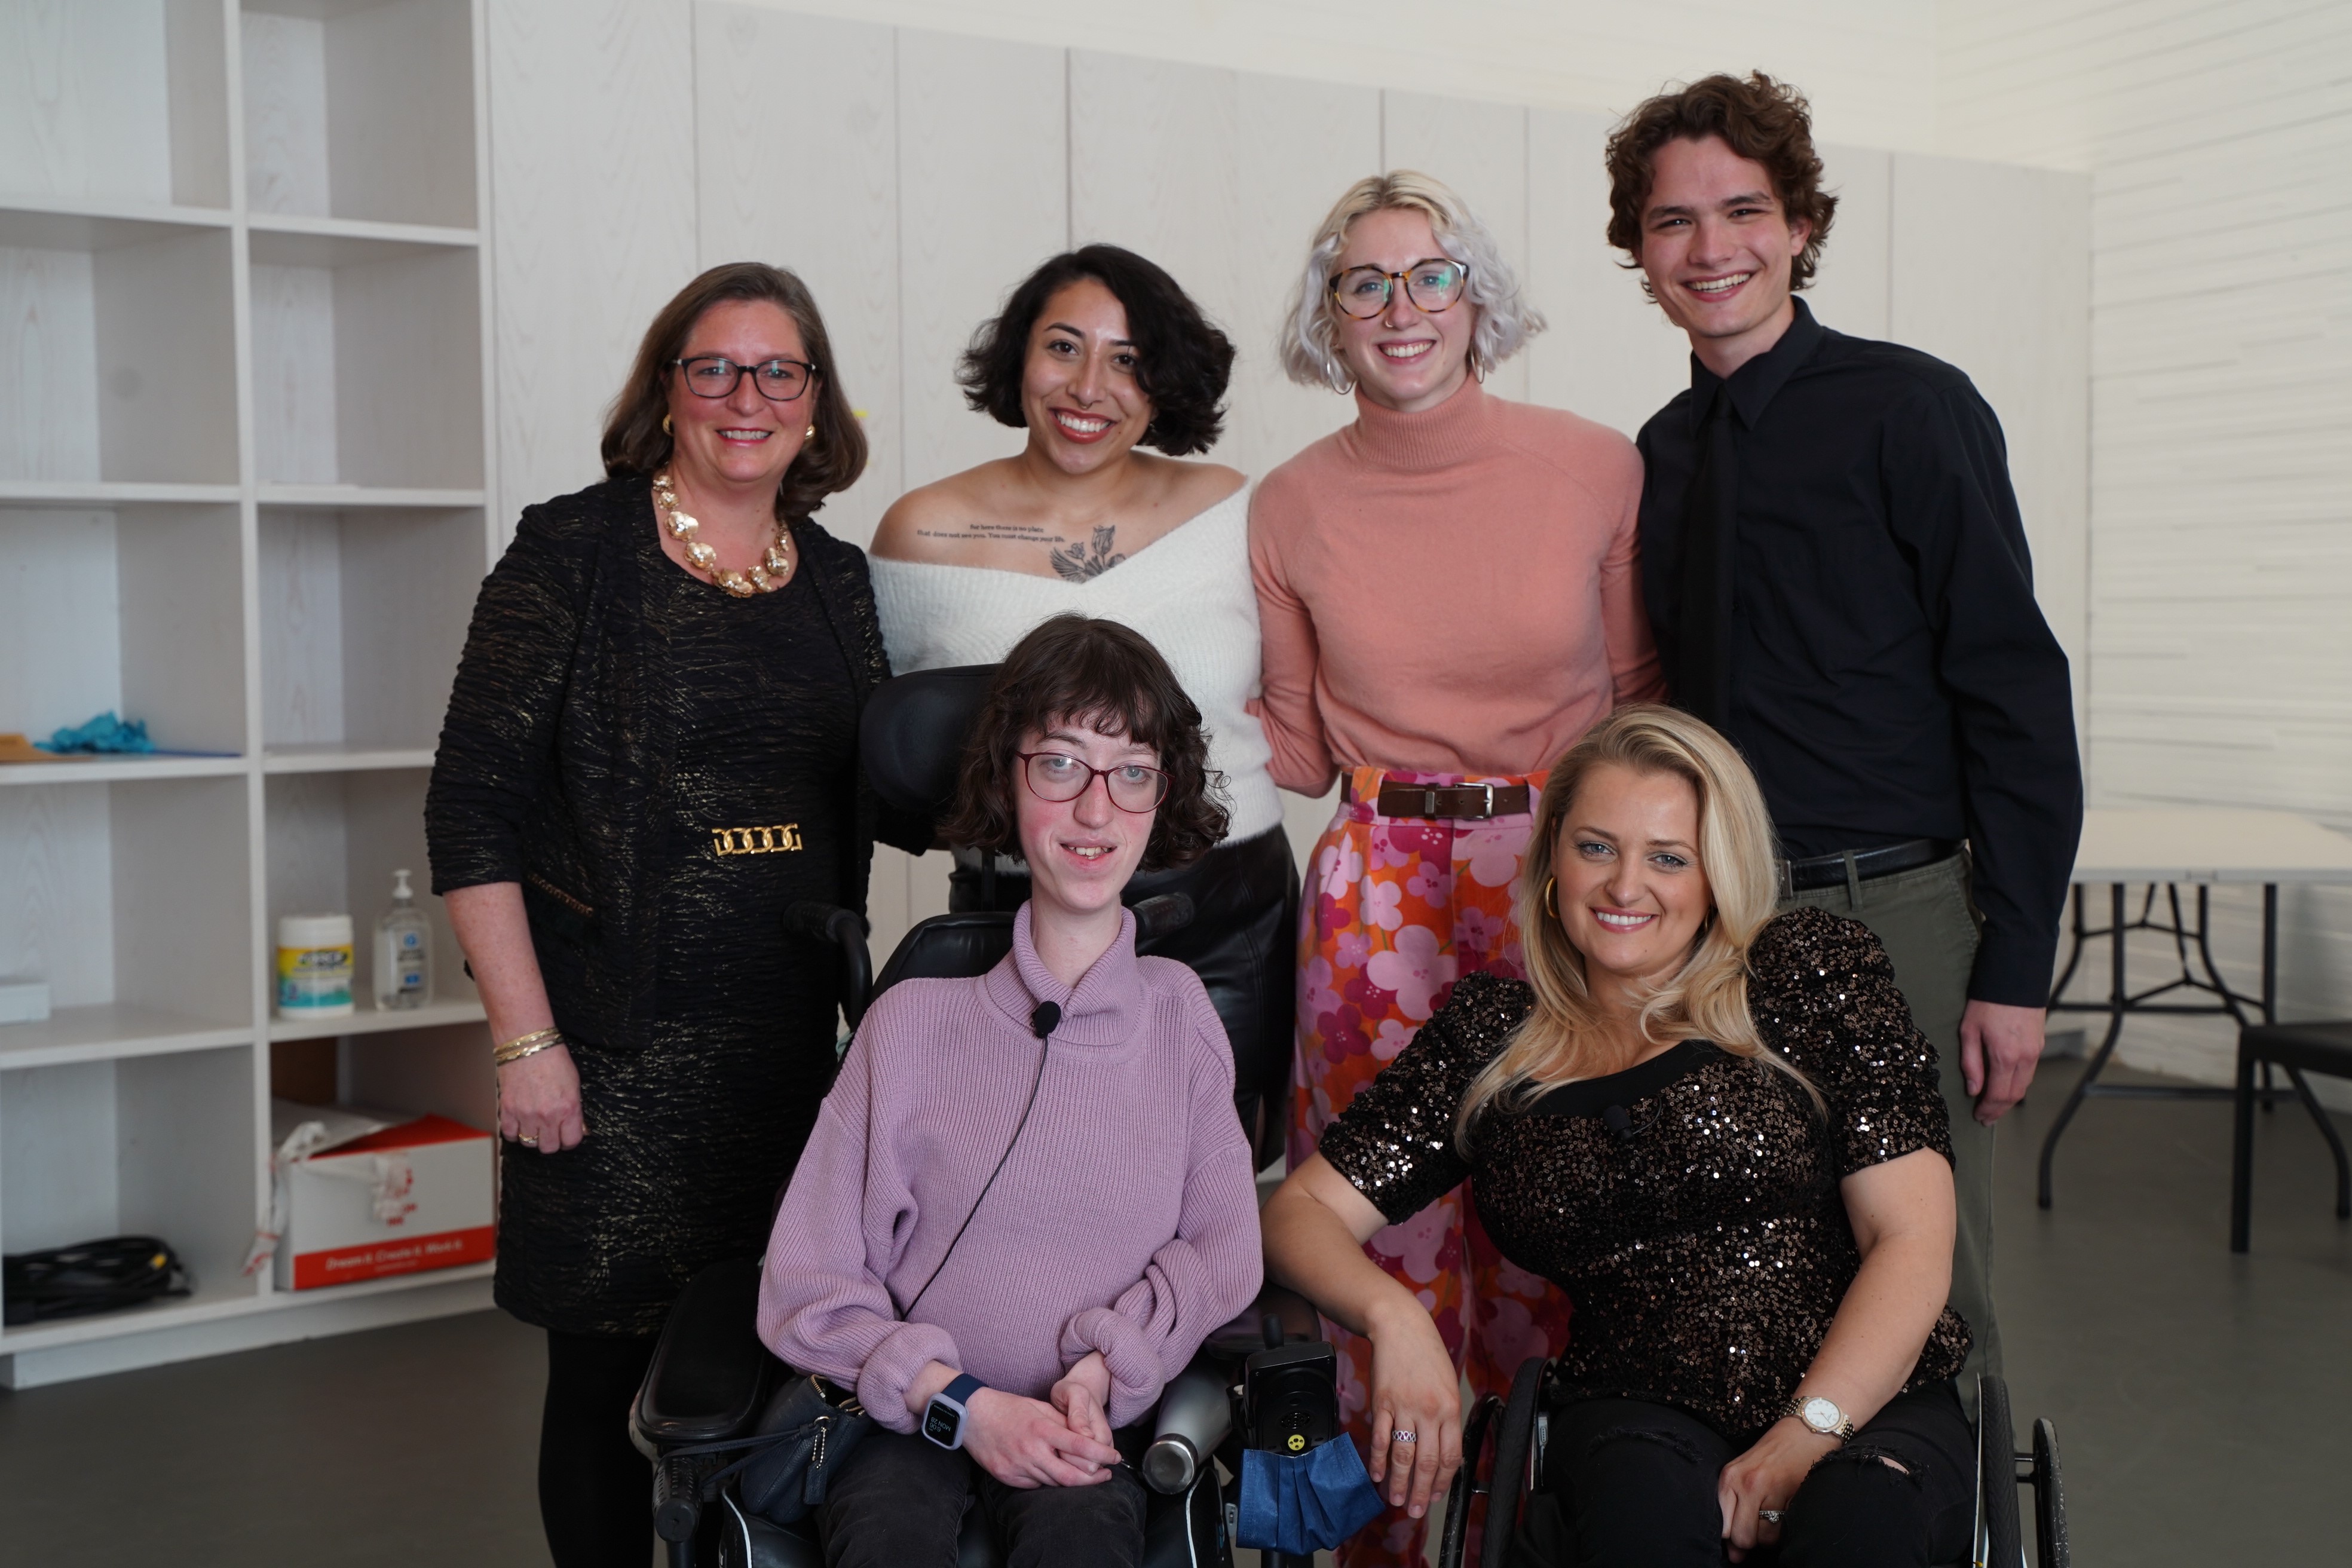 six people pose for a photo; four standing, two using wheelchairs